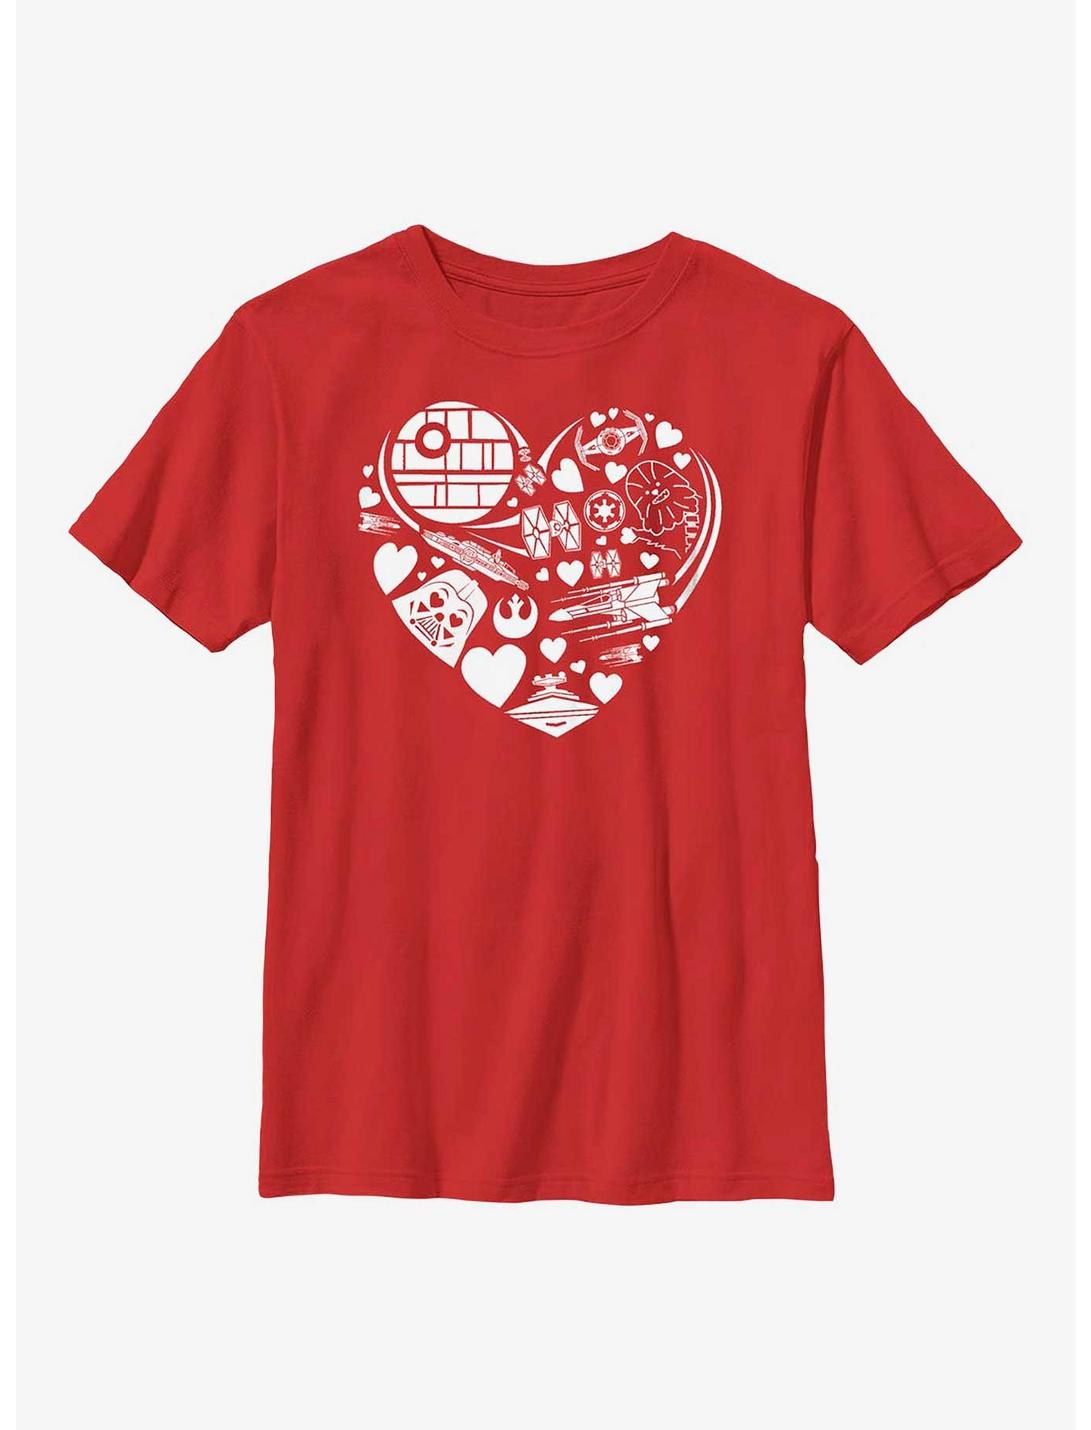 Star Wars Heart Ships Icons Youth T-Shirt, RED, hi-res